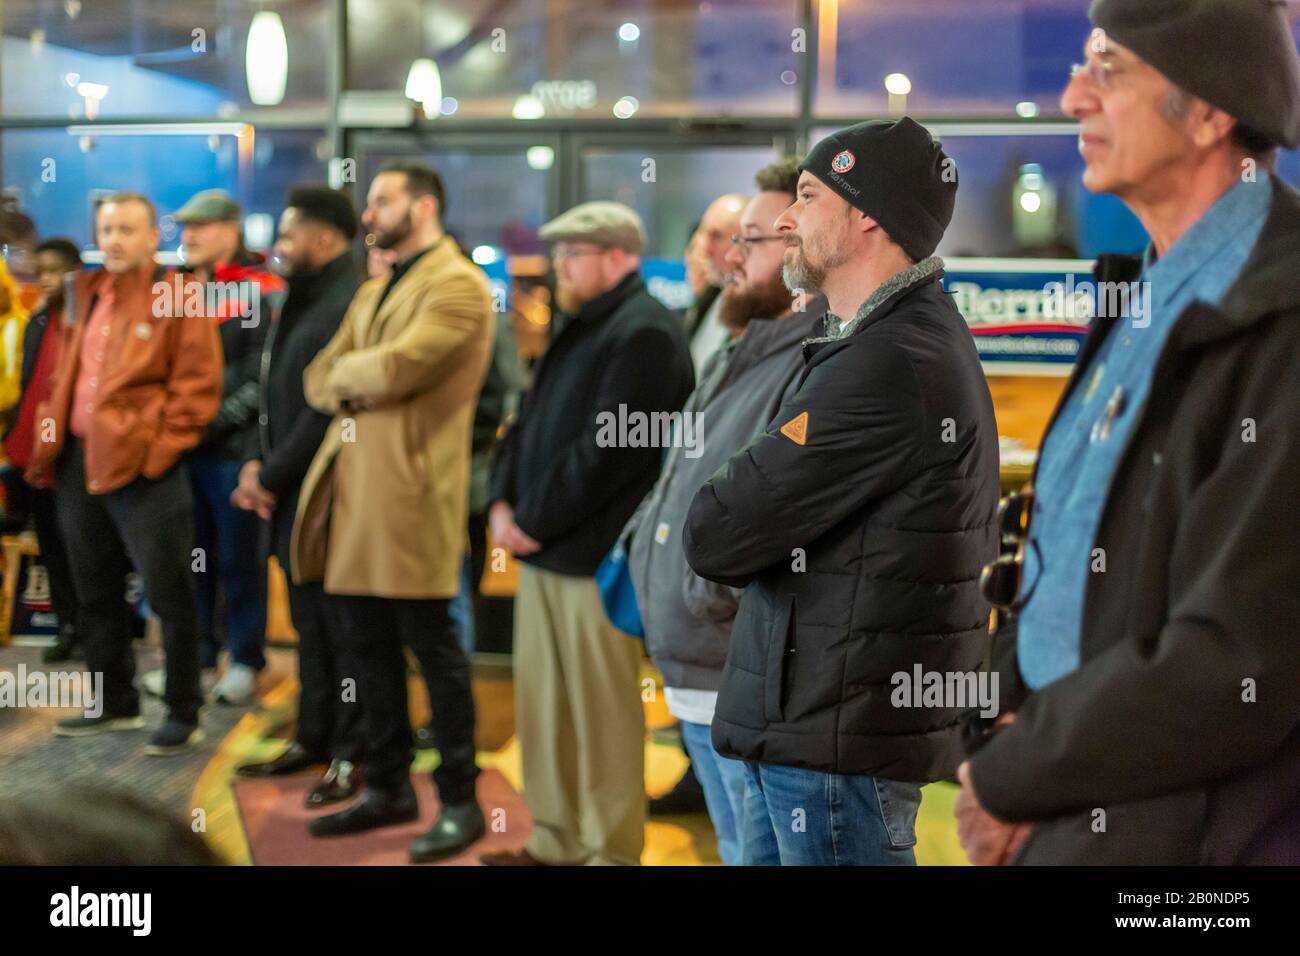 Dearborn, Michigan, USA. 20th Feb, 2020. The Bernie Sanders campaign opened five field offices, including one in Dearborn, in advance of the state's March 10 presidential primary election. Credit: Jim West/Alamy Live News Stock Photo